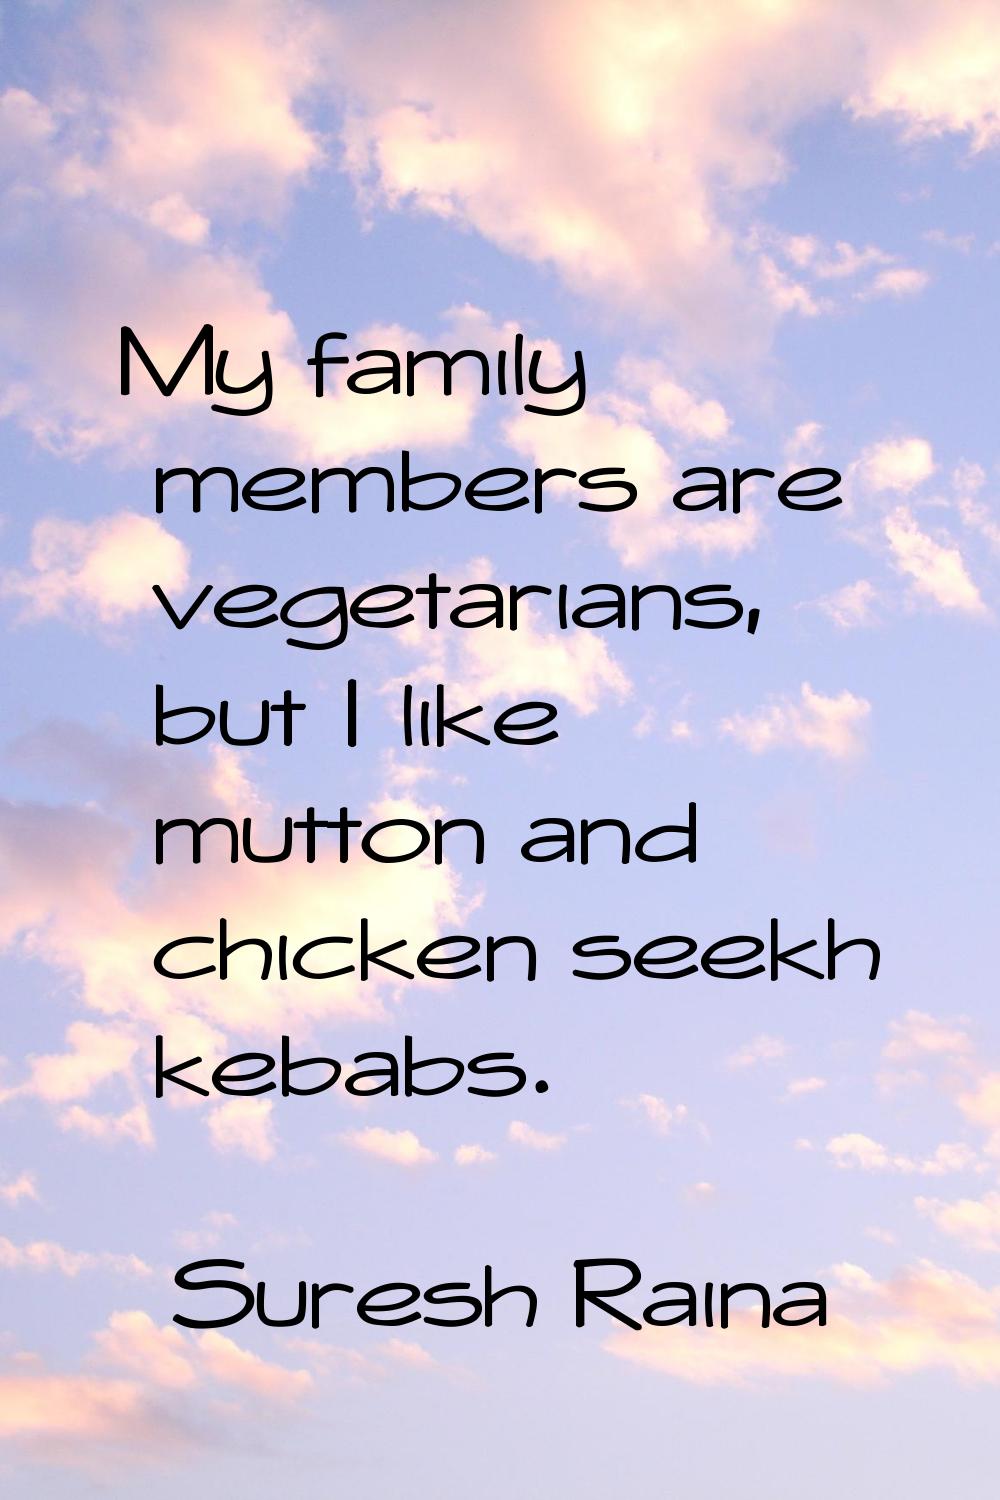 My family members are vegetarians, but I like mutton and chicken seekh kebabs.